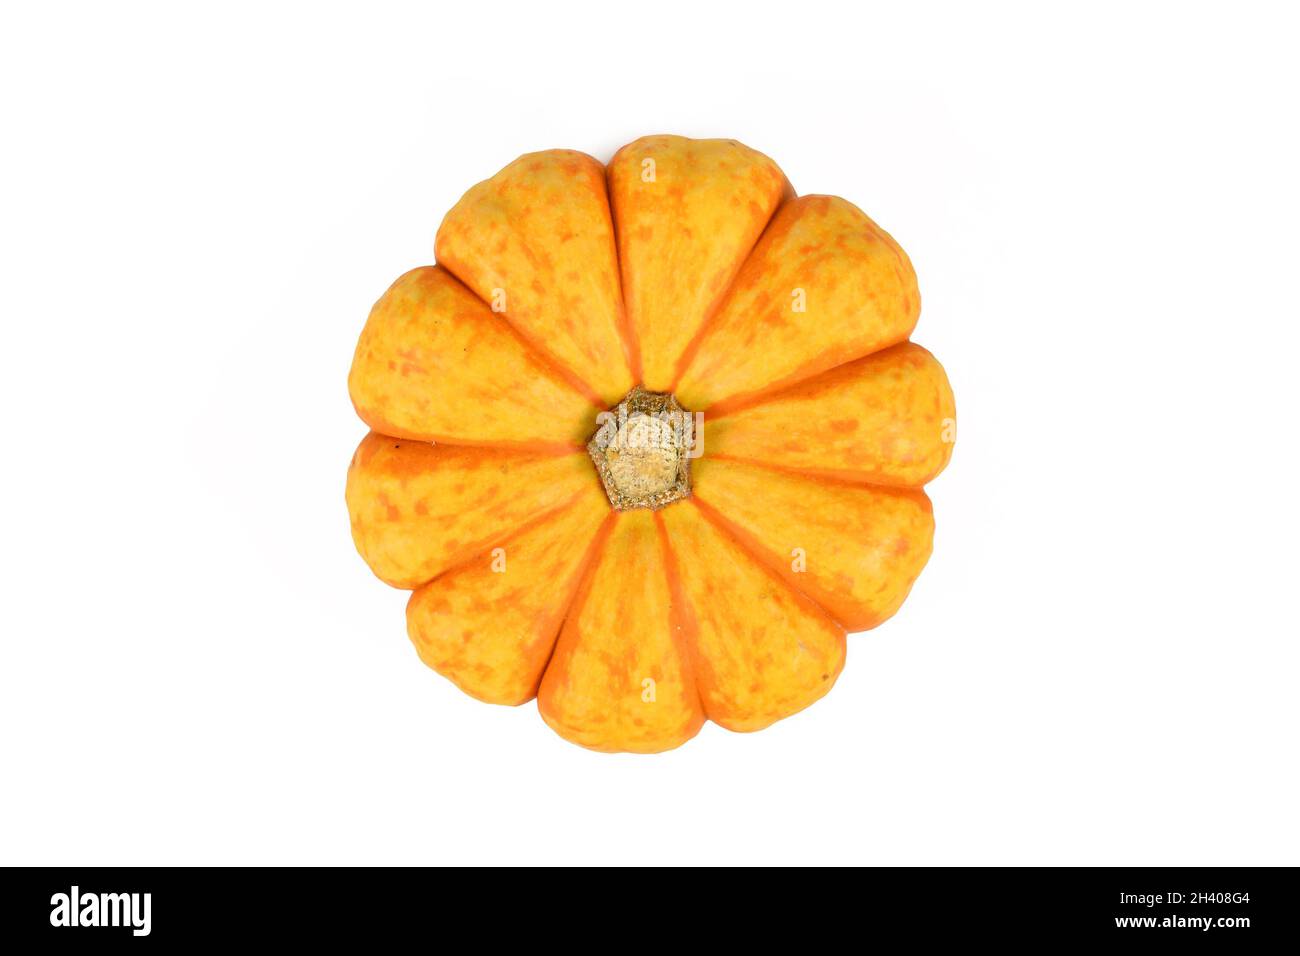 Top view of orange and yellow Carnival squash on white background Stock Photo